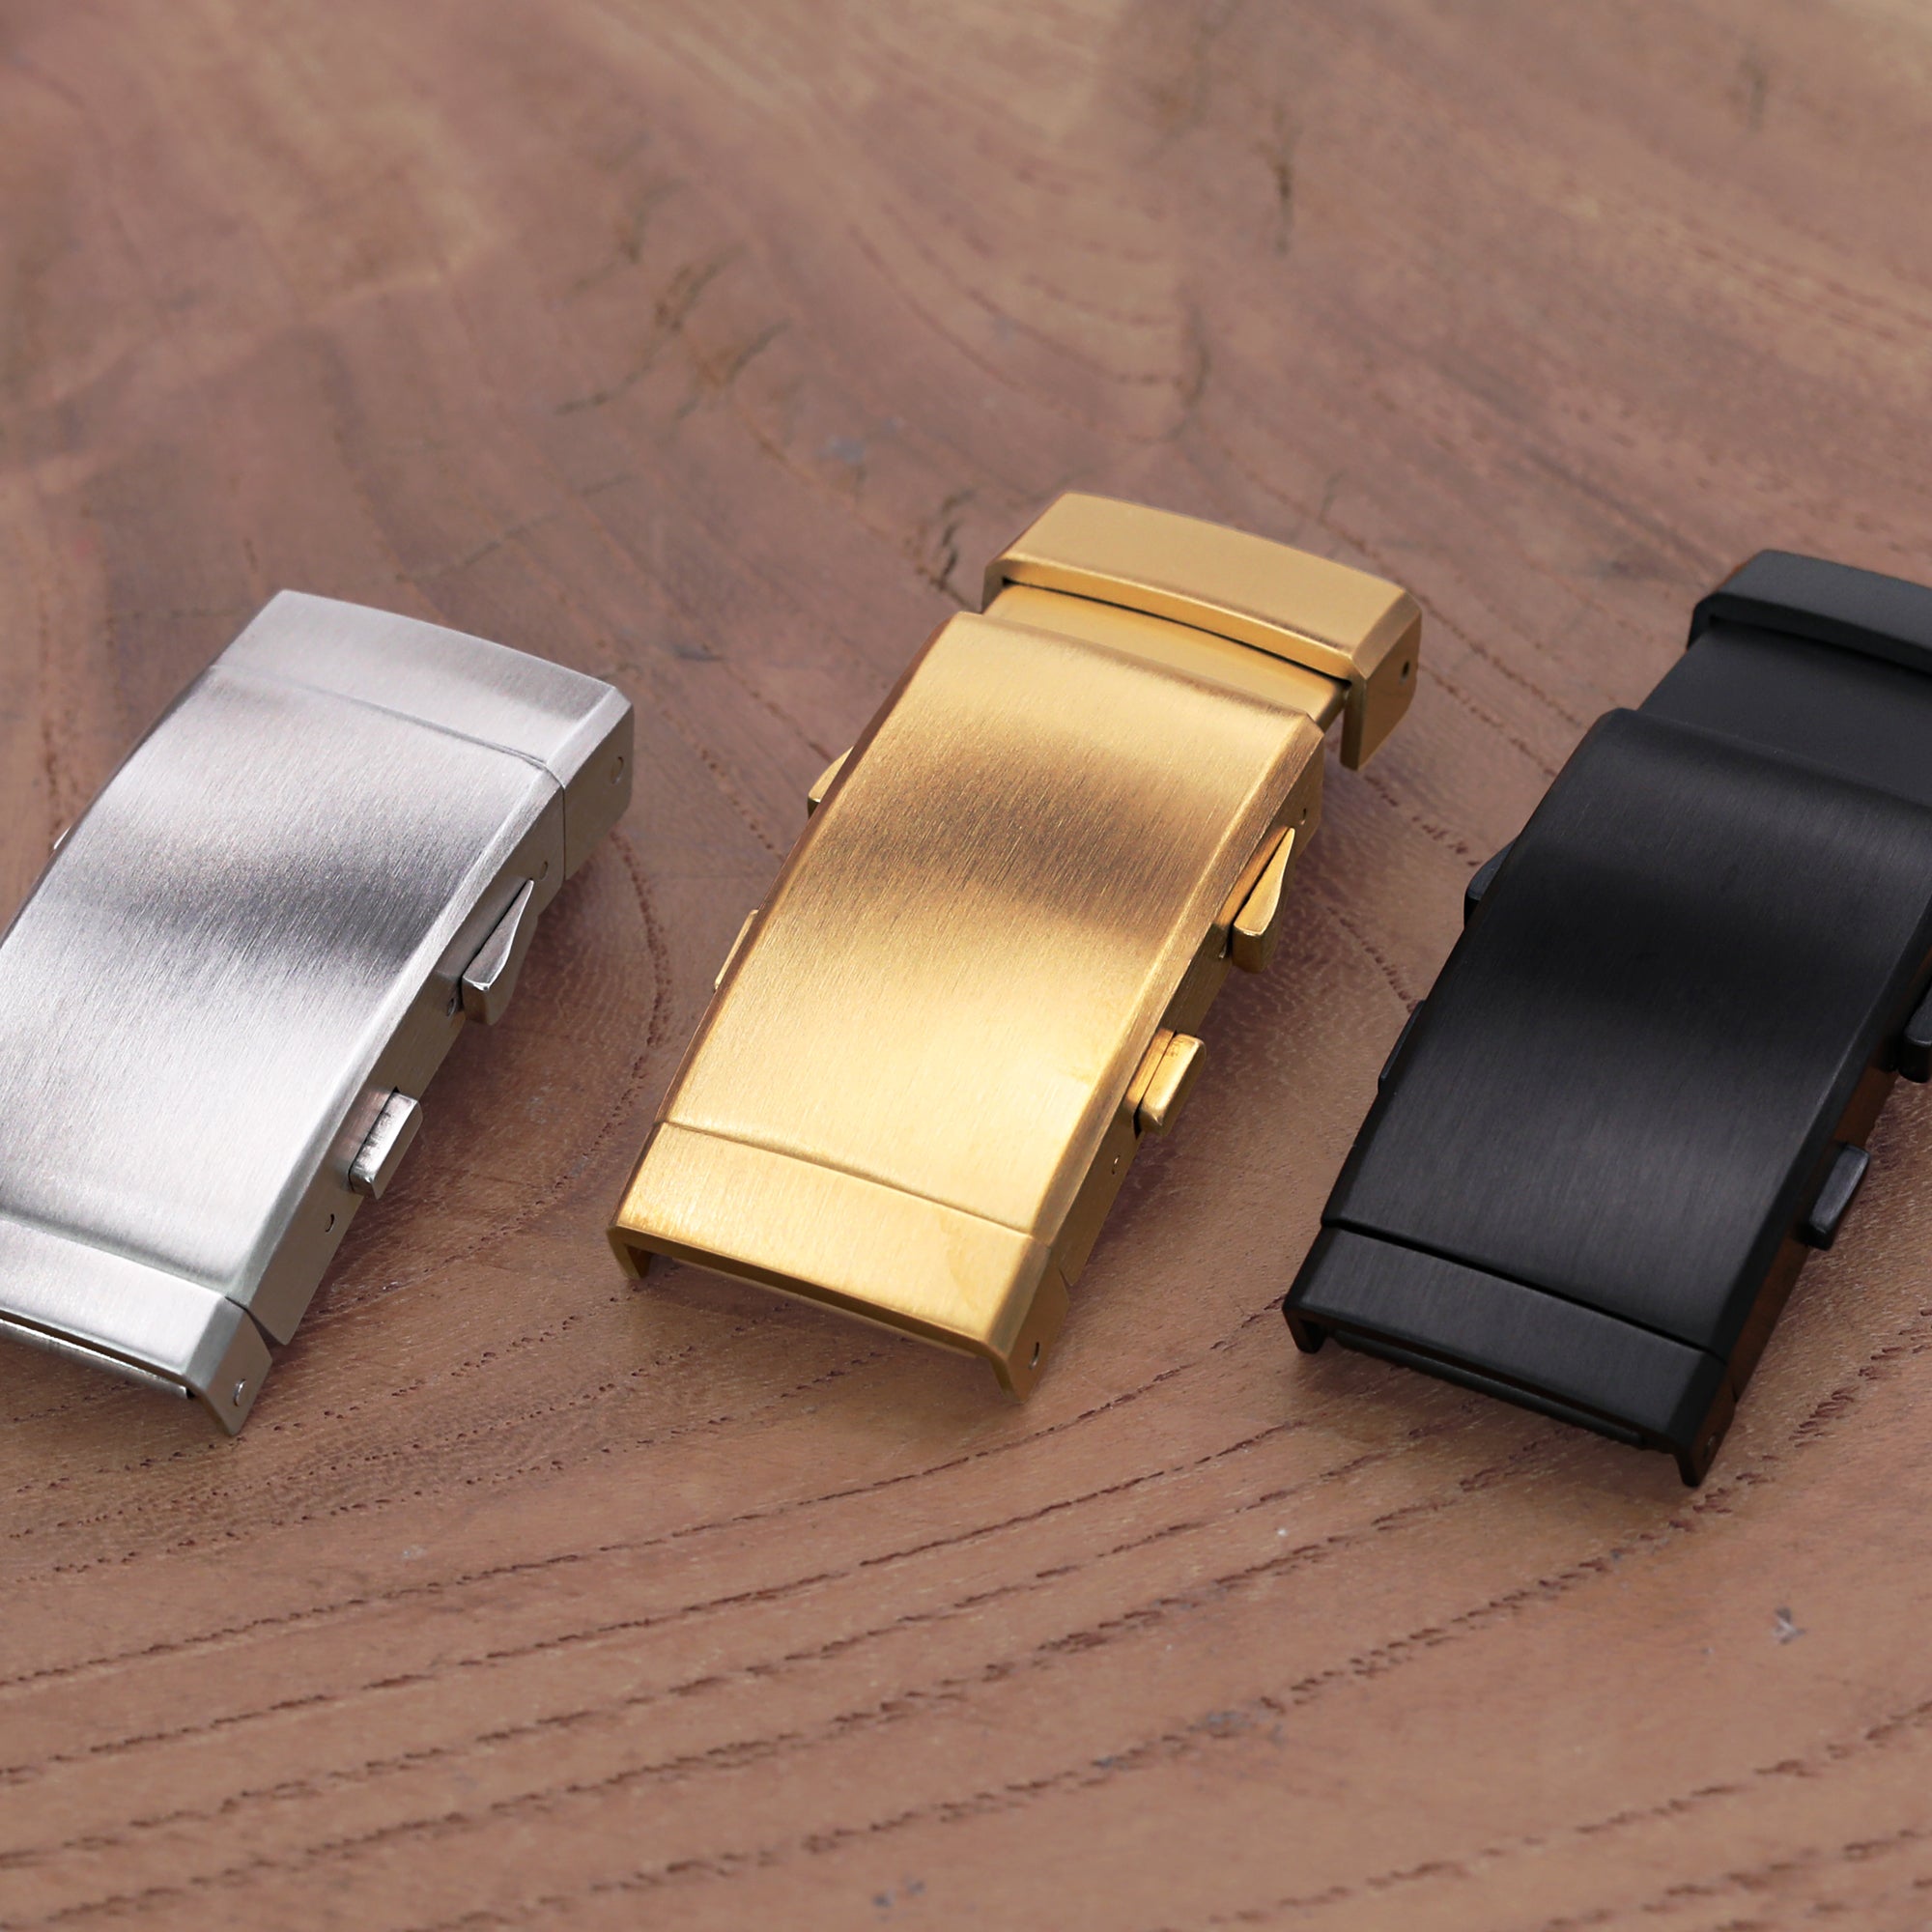 Strapcode MiLTAT Ratchet Buckle Clasp is an ideall Wetsuit watch band buckle .